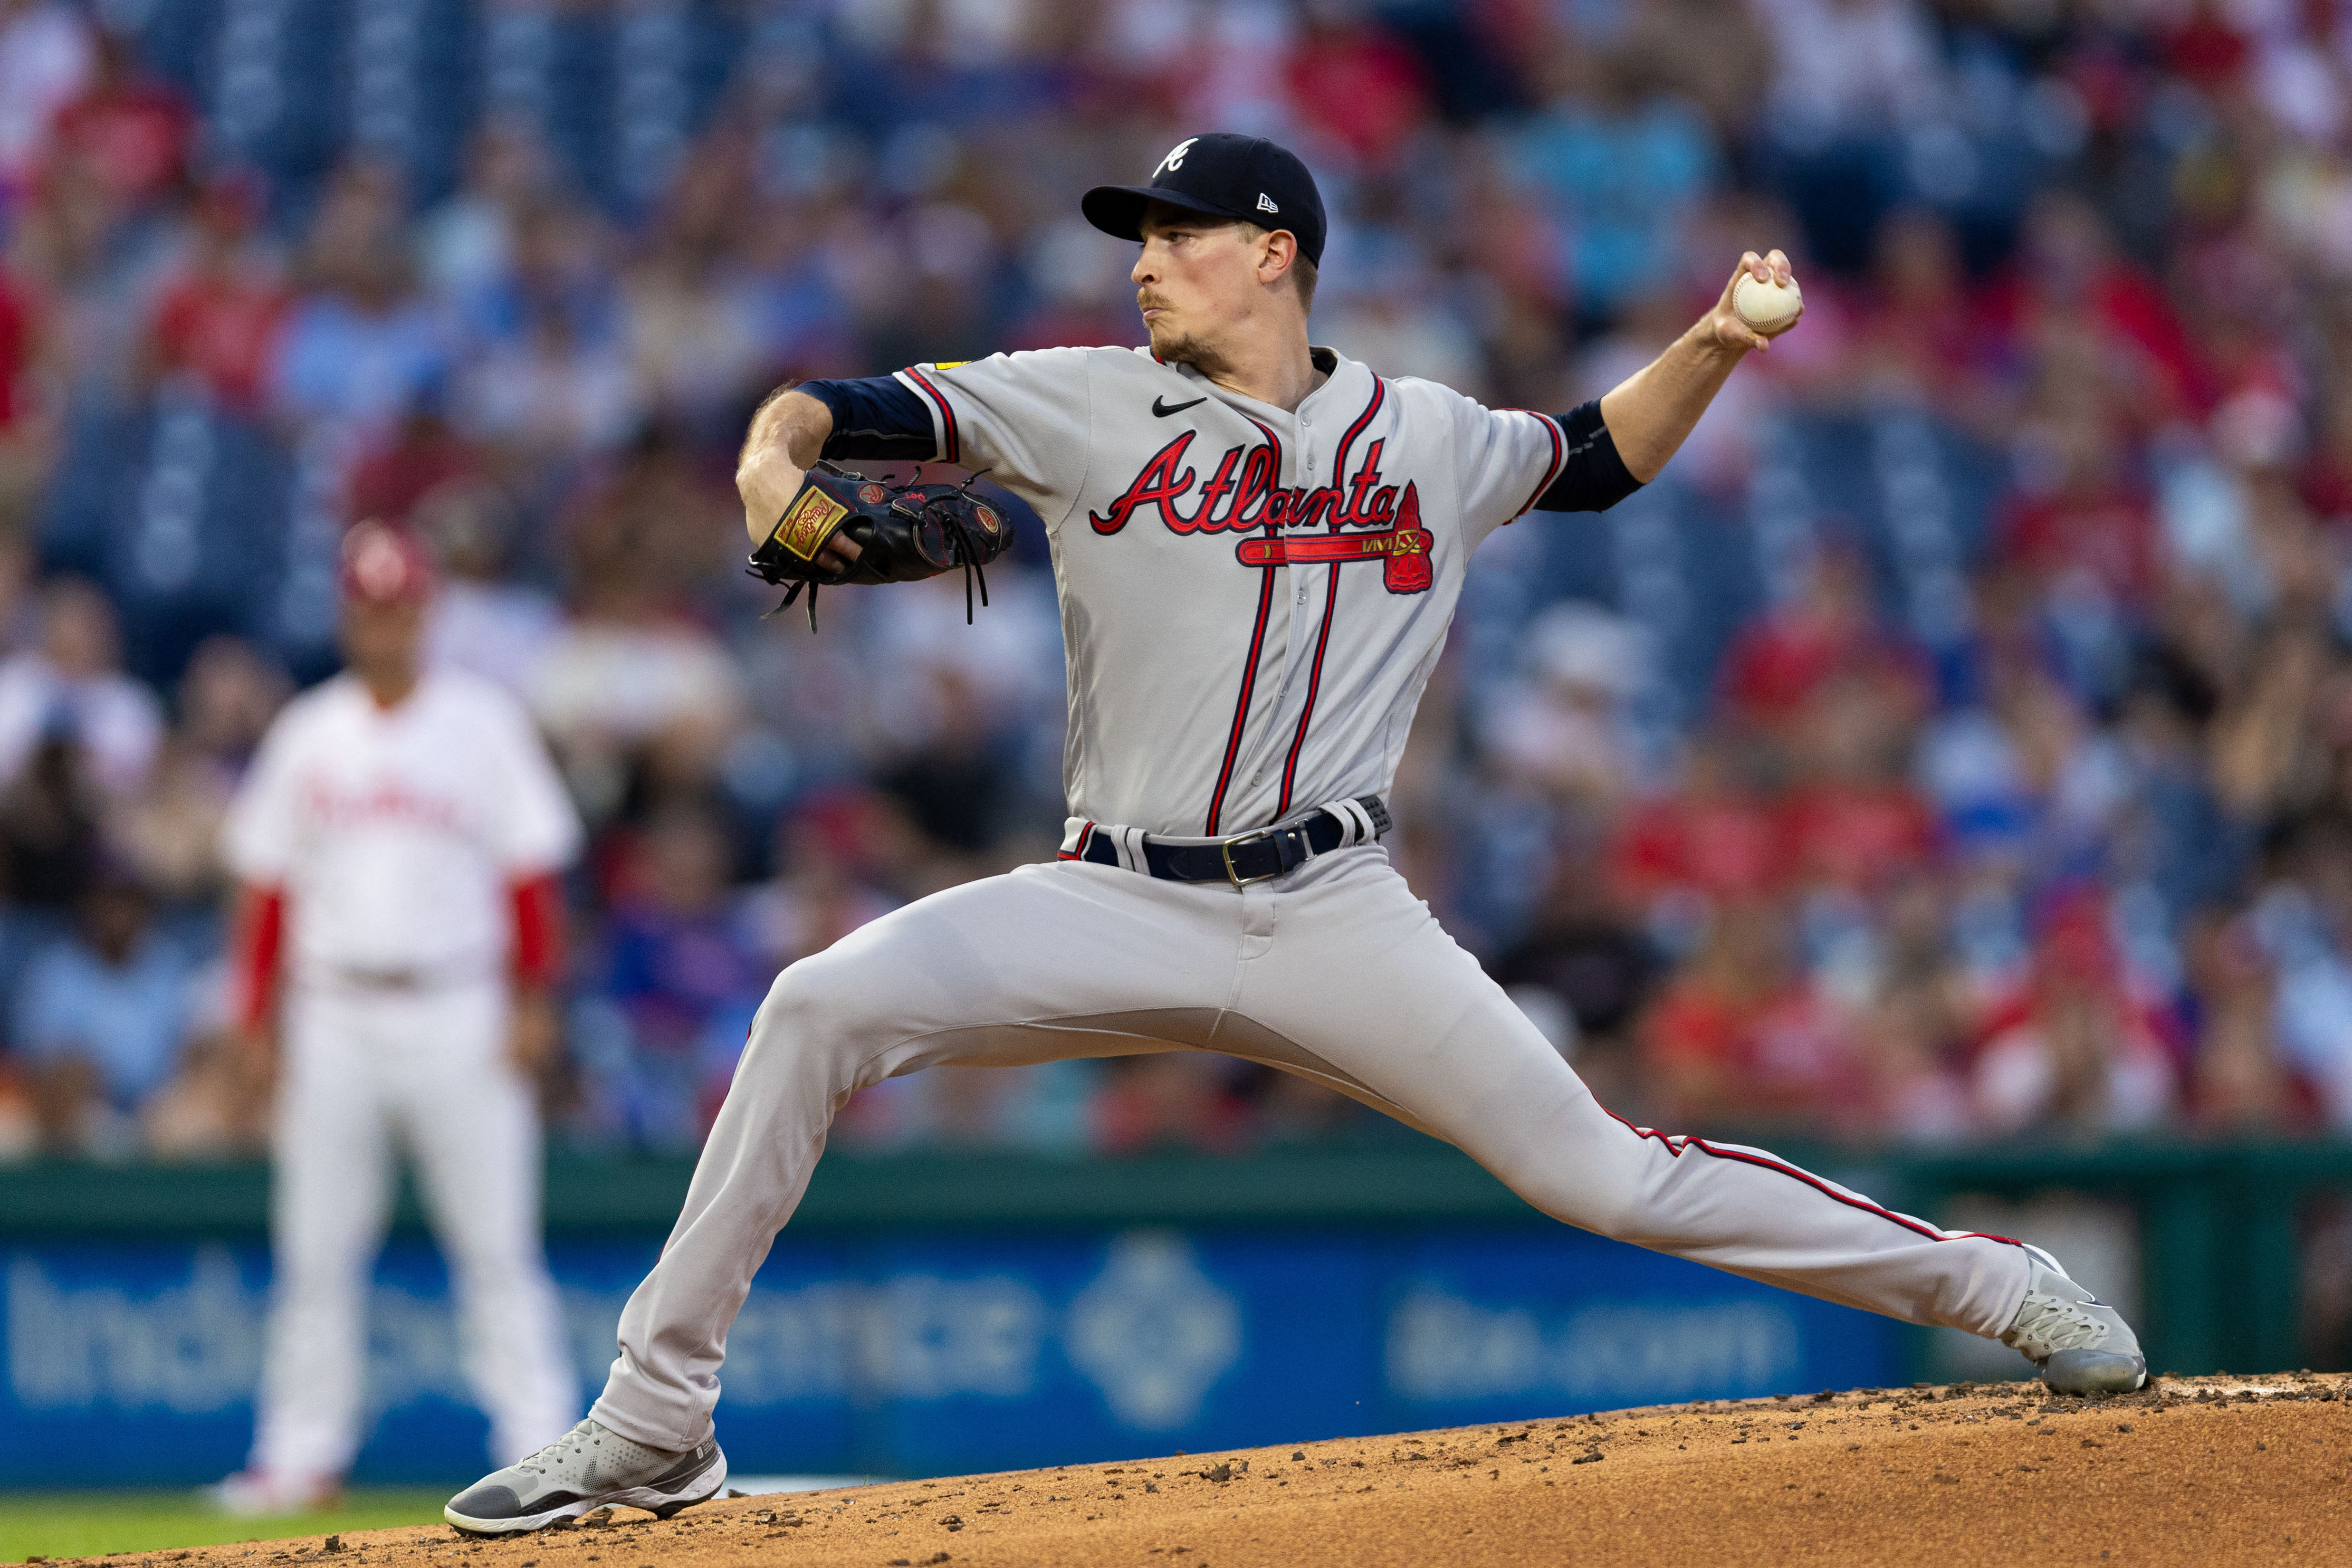 Olson is center of long-term plan to keep Braves competitive